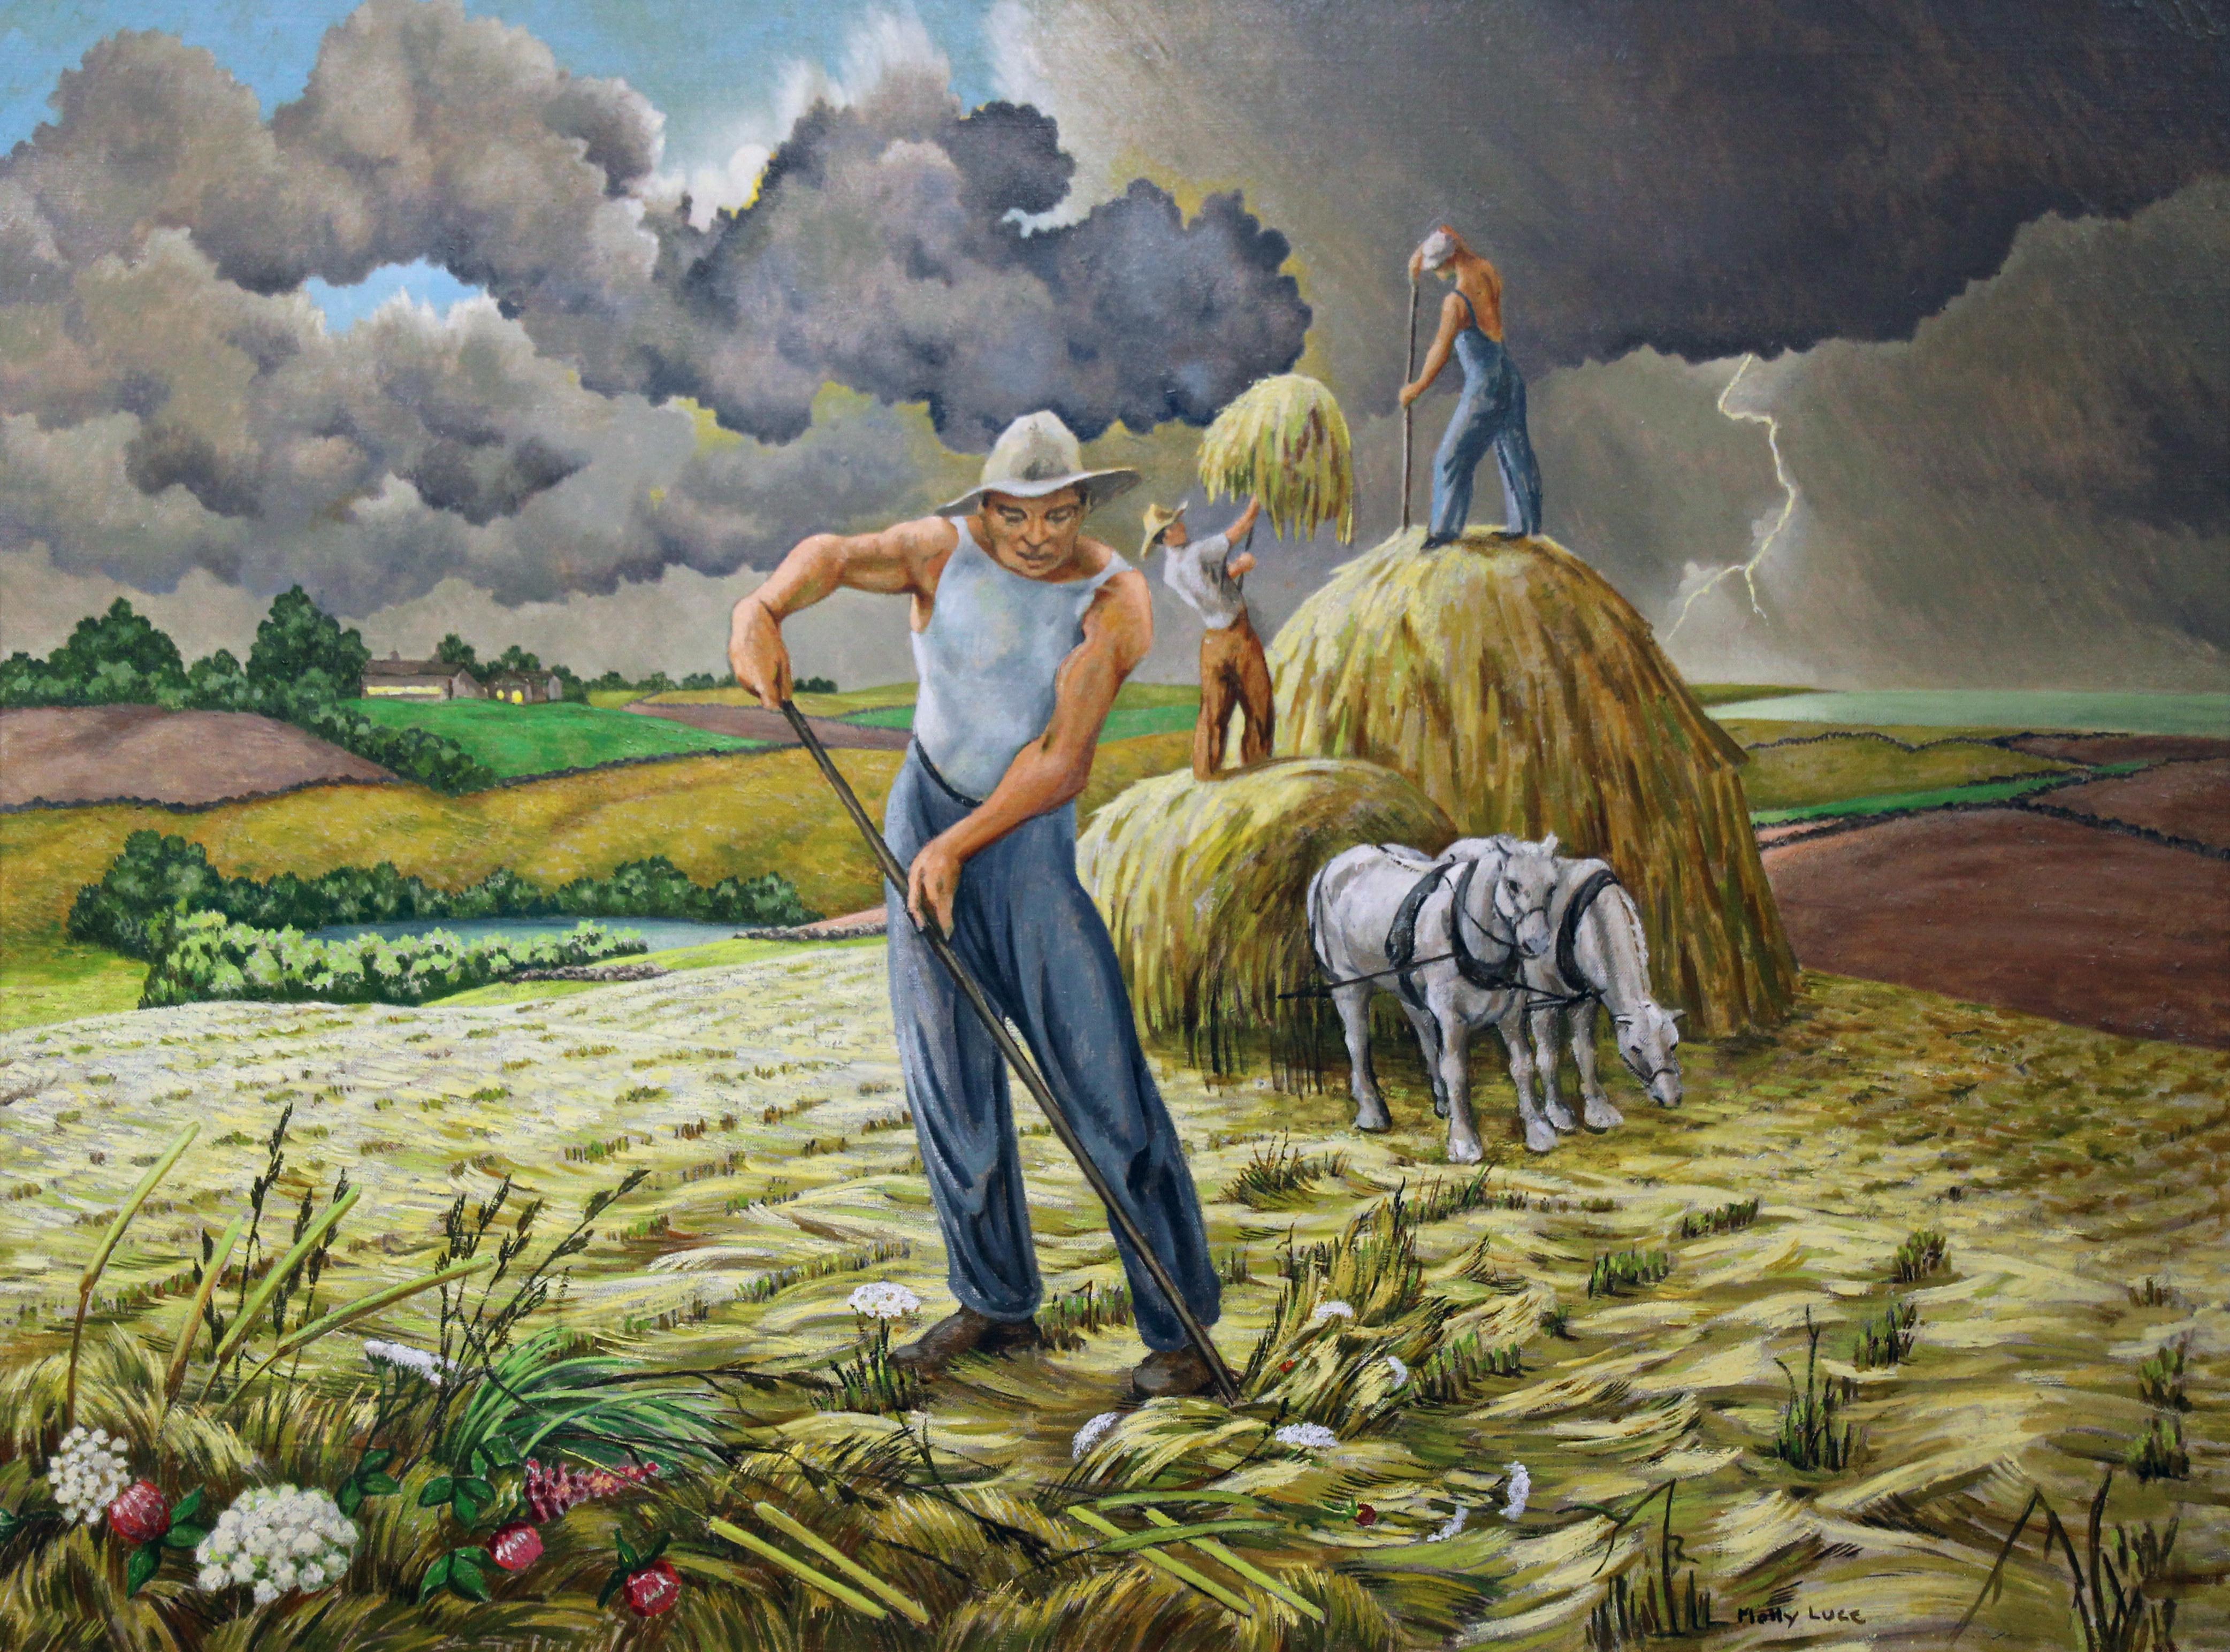 Molly Luce Figurative Painting - Harvest, Landscape and Figures by Female American Realist Artist